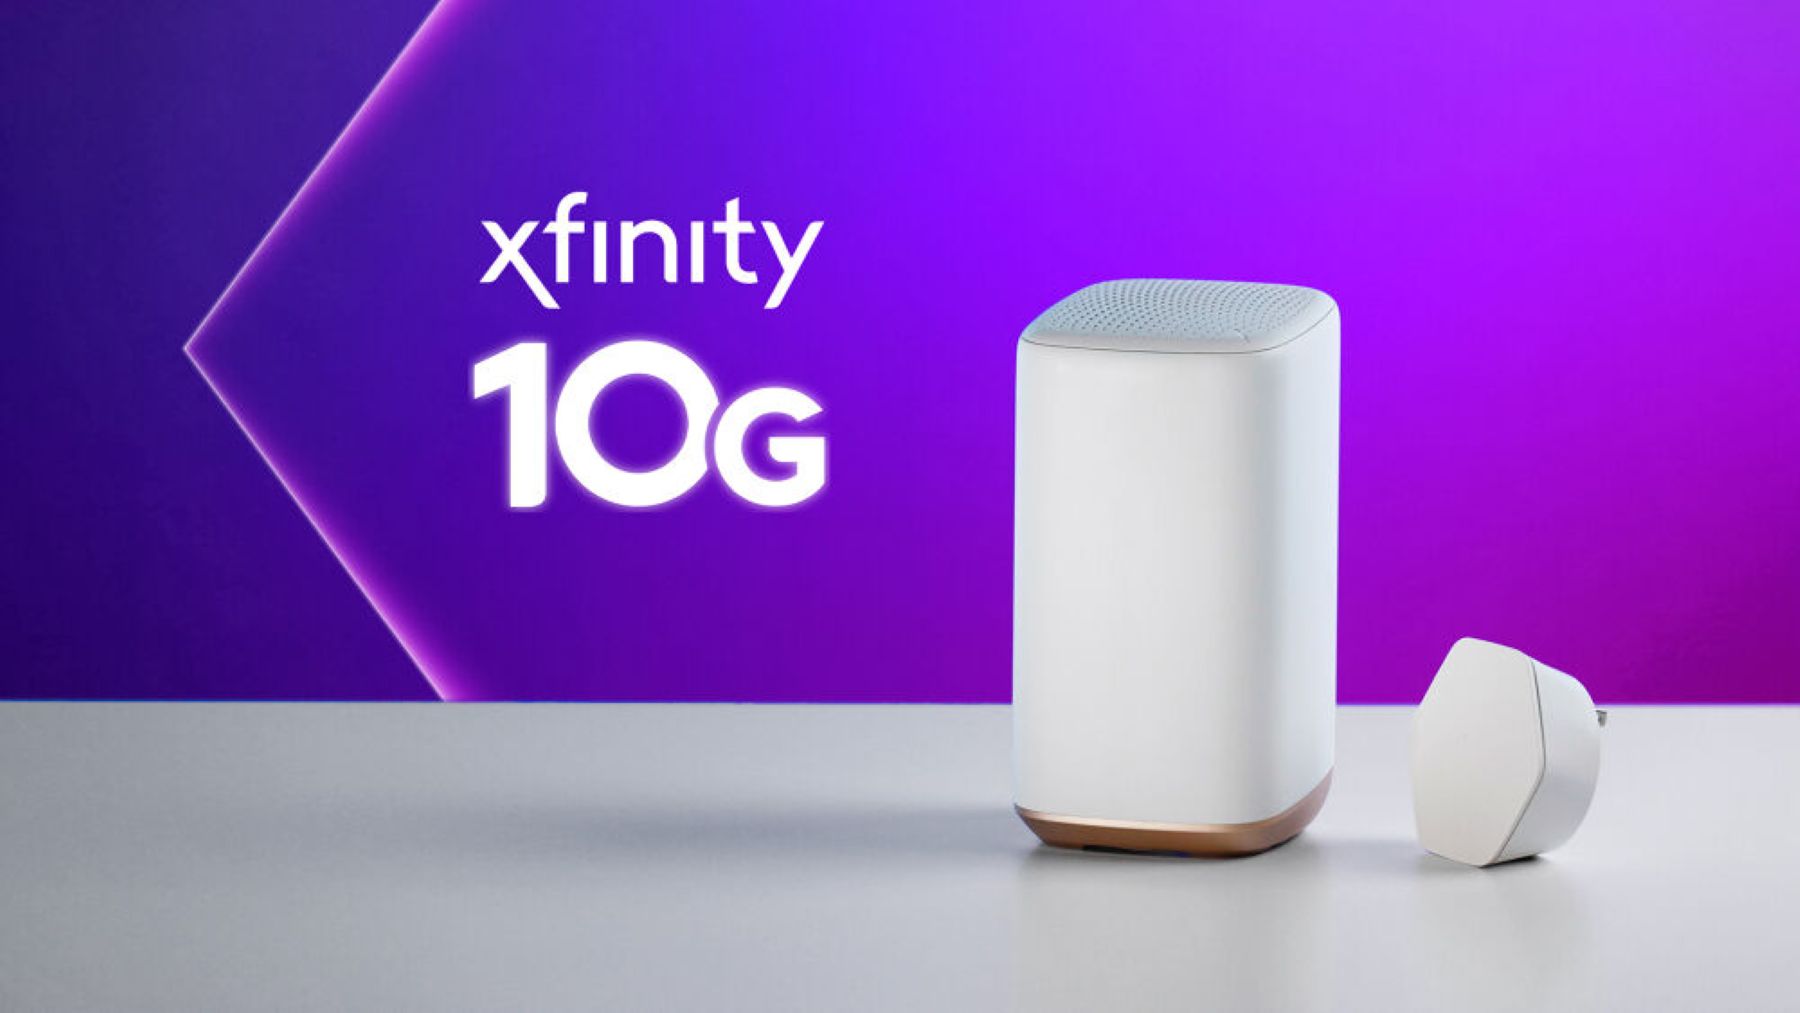 Tennessee Getting Latest Upgrade to its Xfinity 10G Network